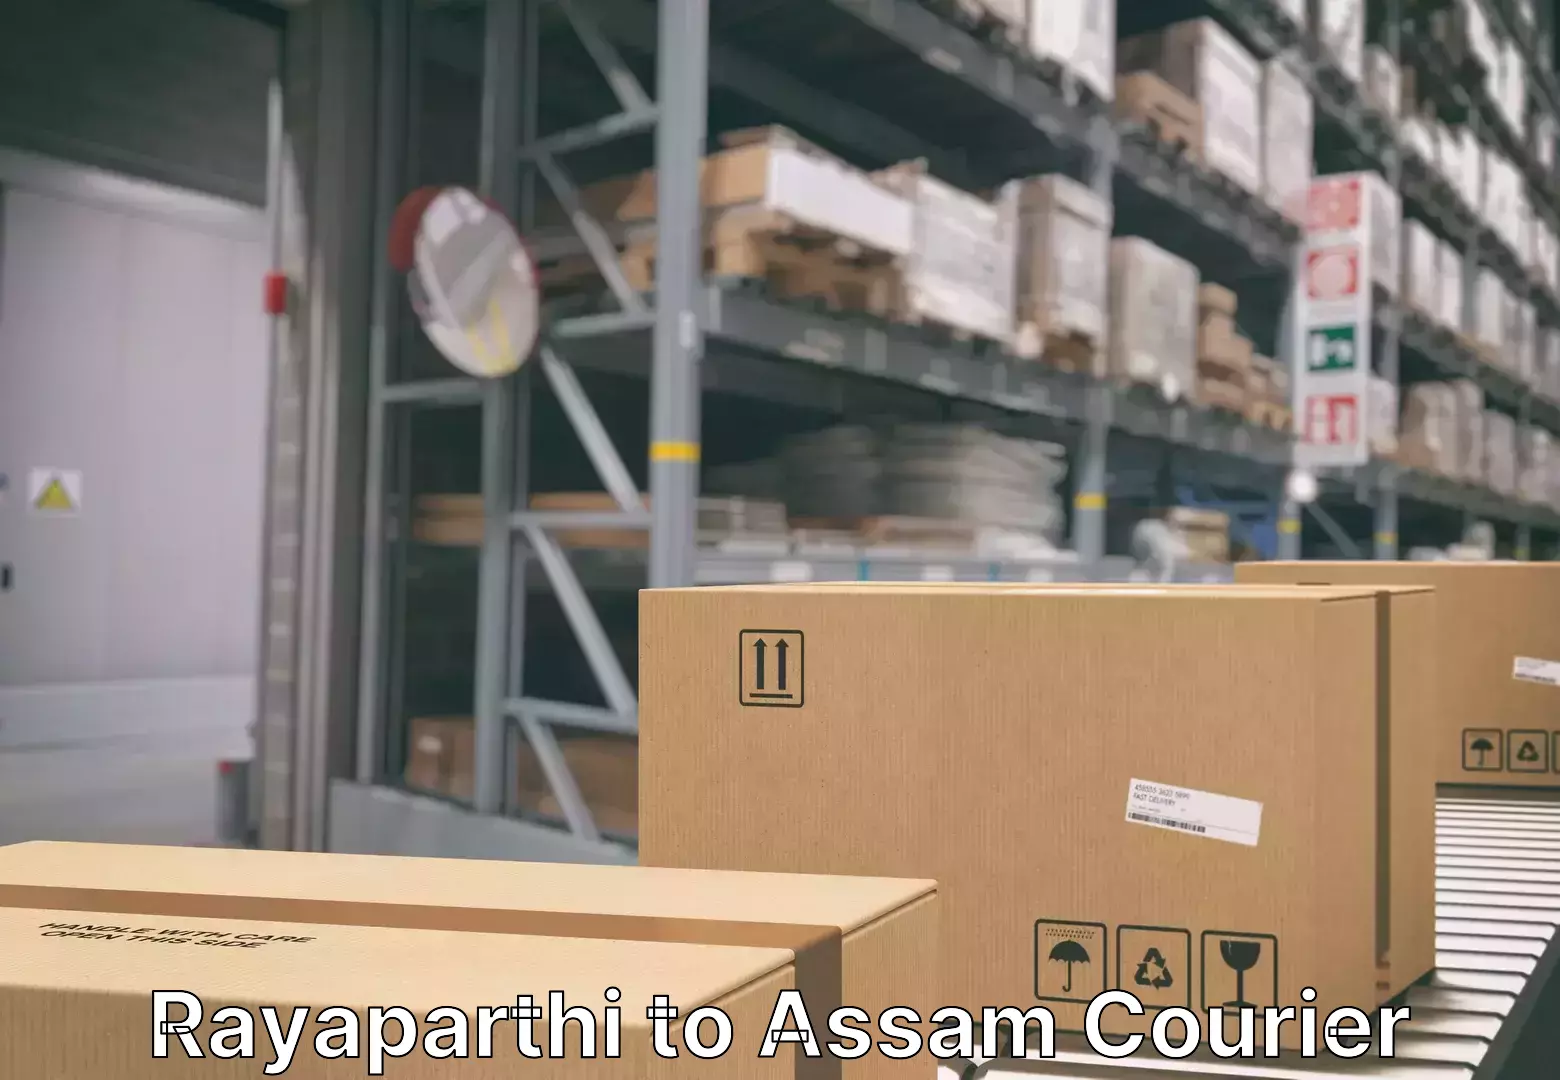 Moving and packing experts Rayaparthi to Assam